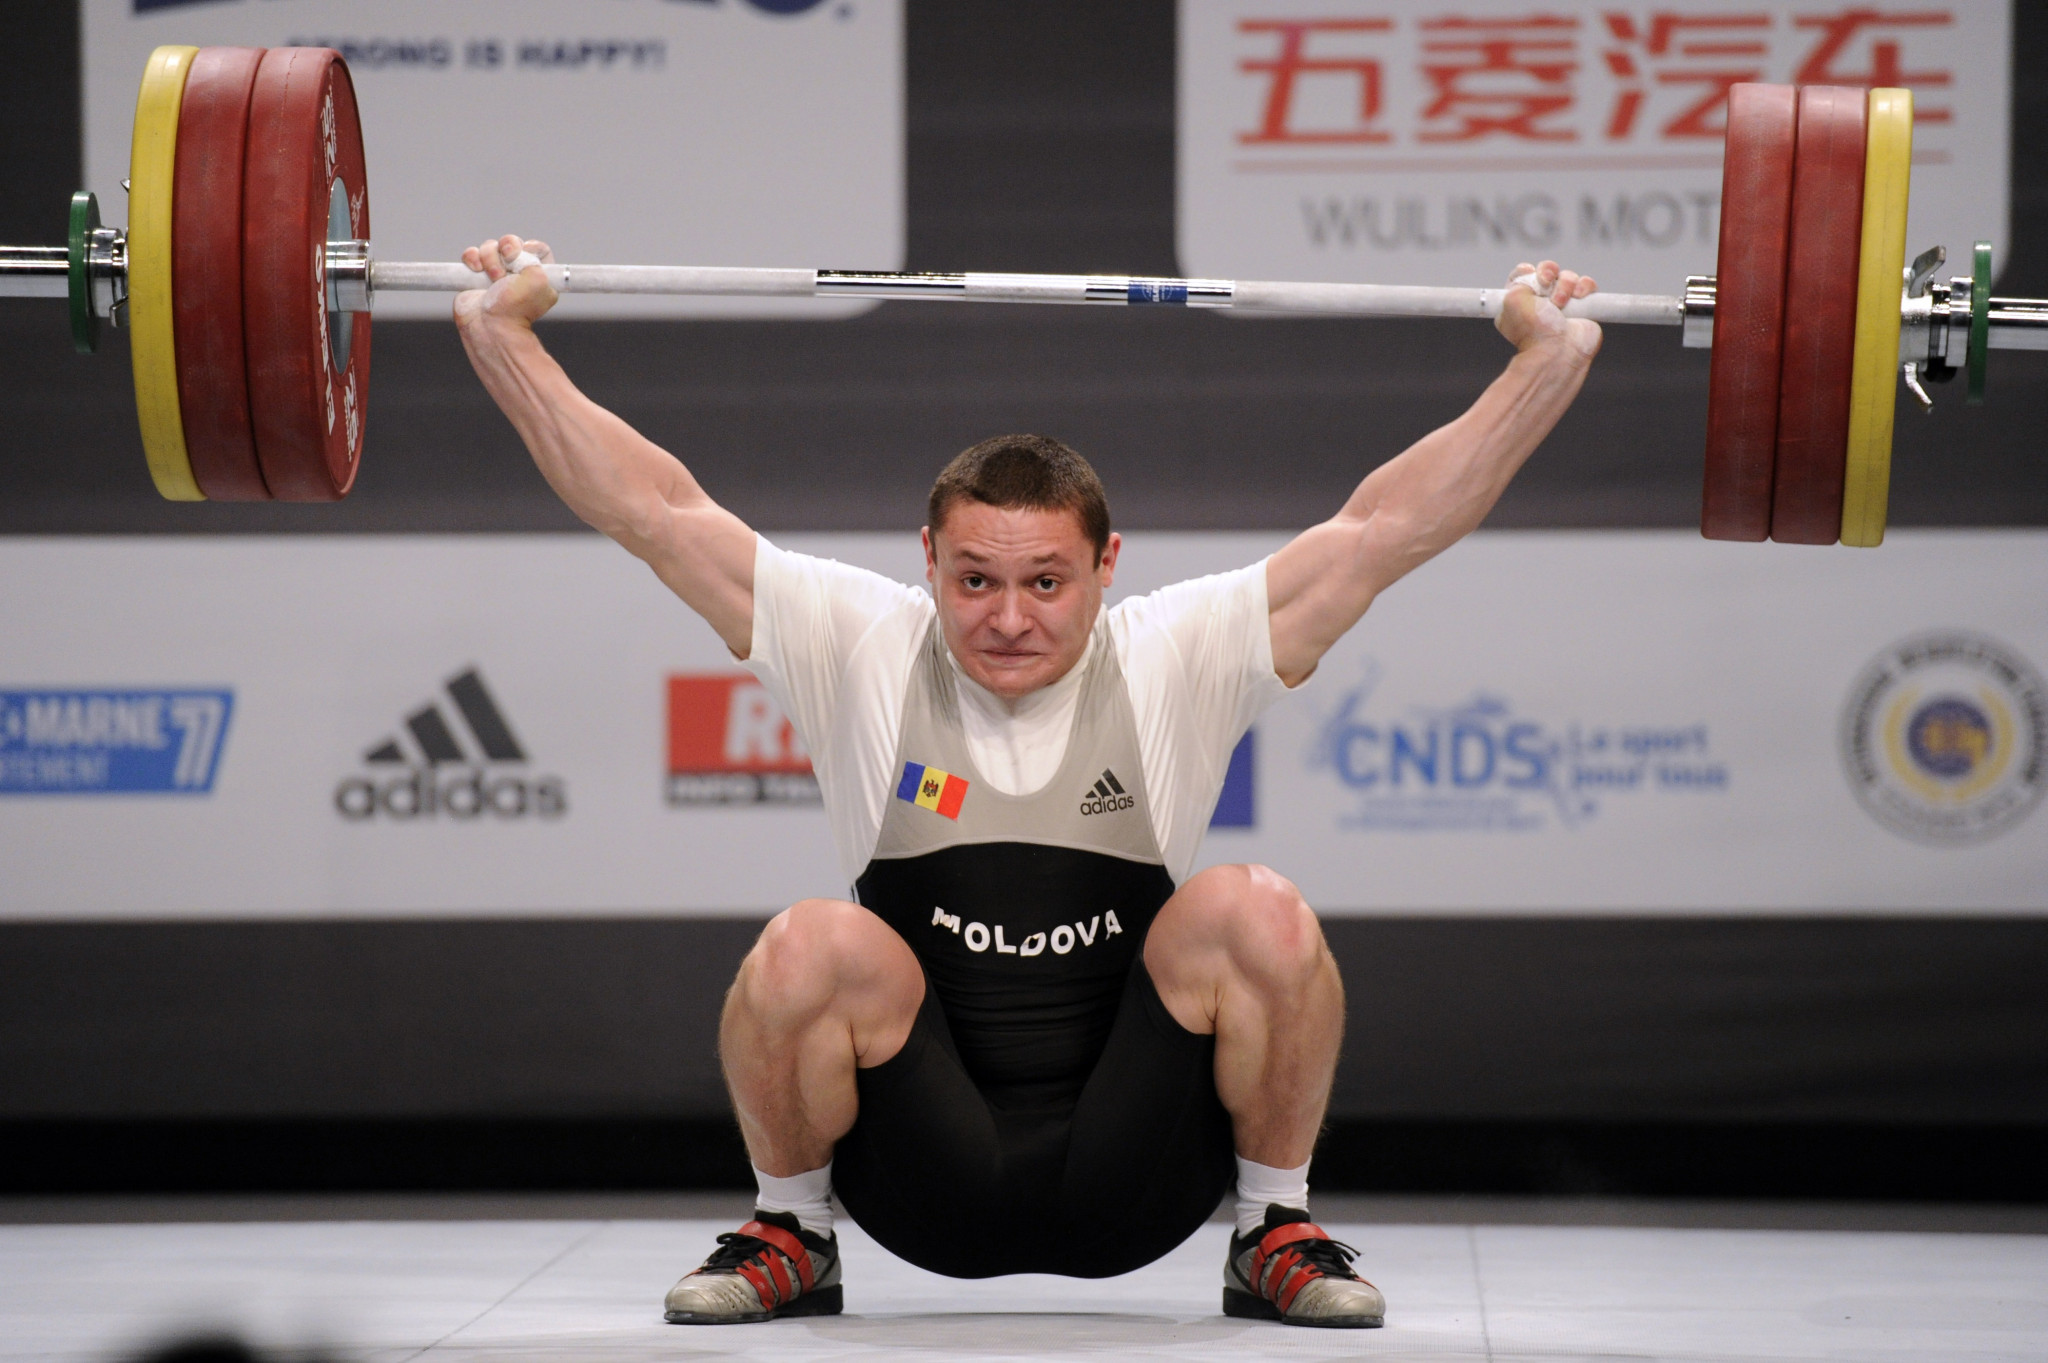 Alexandru Dudoglo is among the Moldovan weightlifters to have been banned for doping, with his results at Beijing 2008 disqualified ©Getty Images